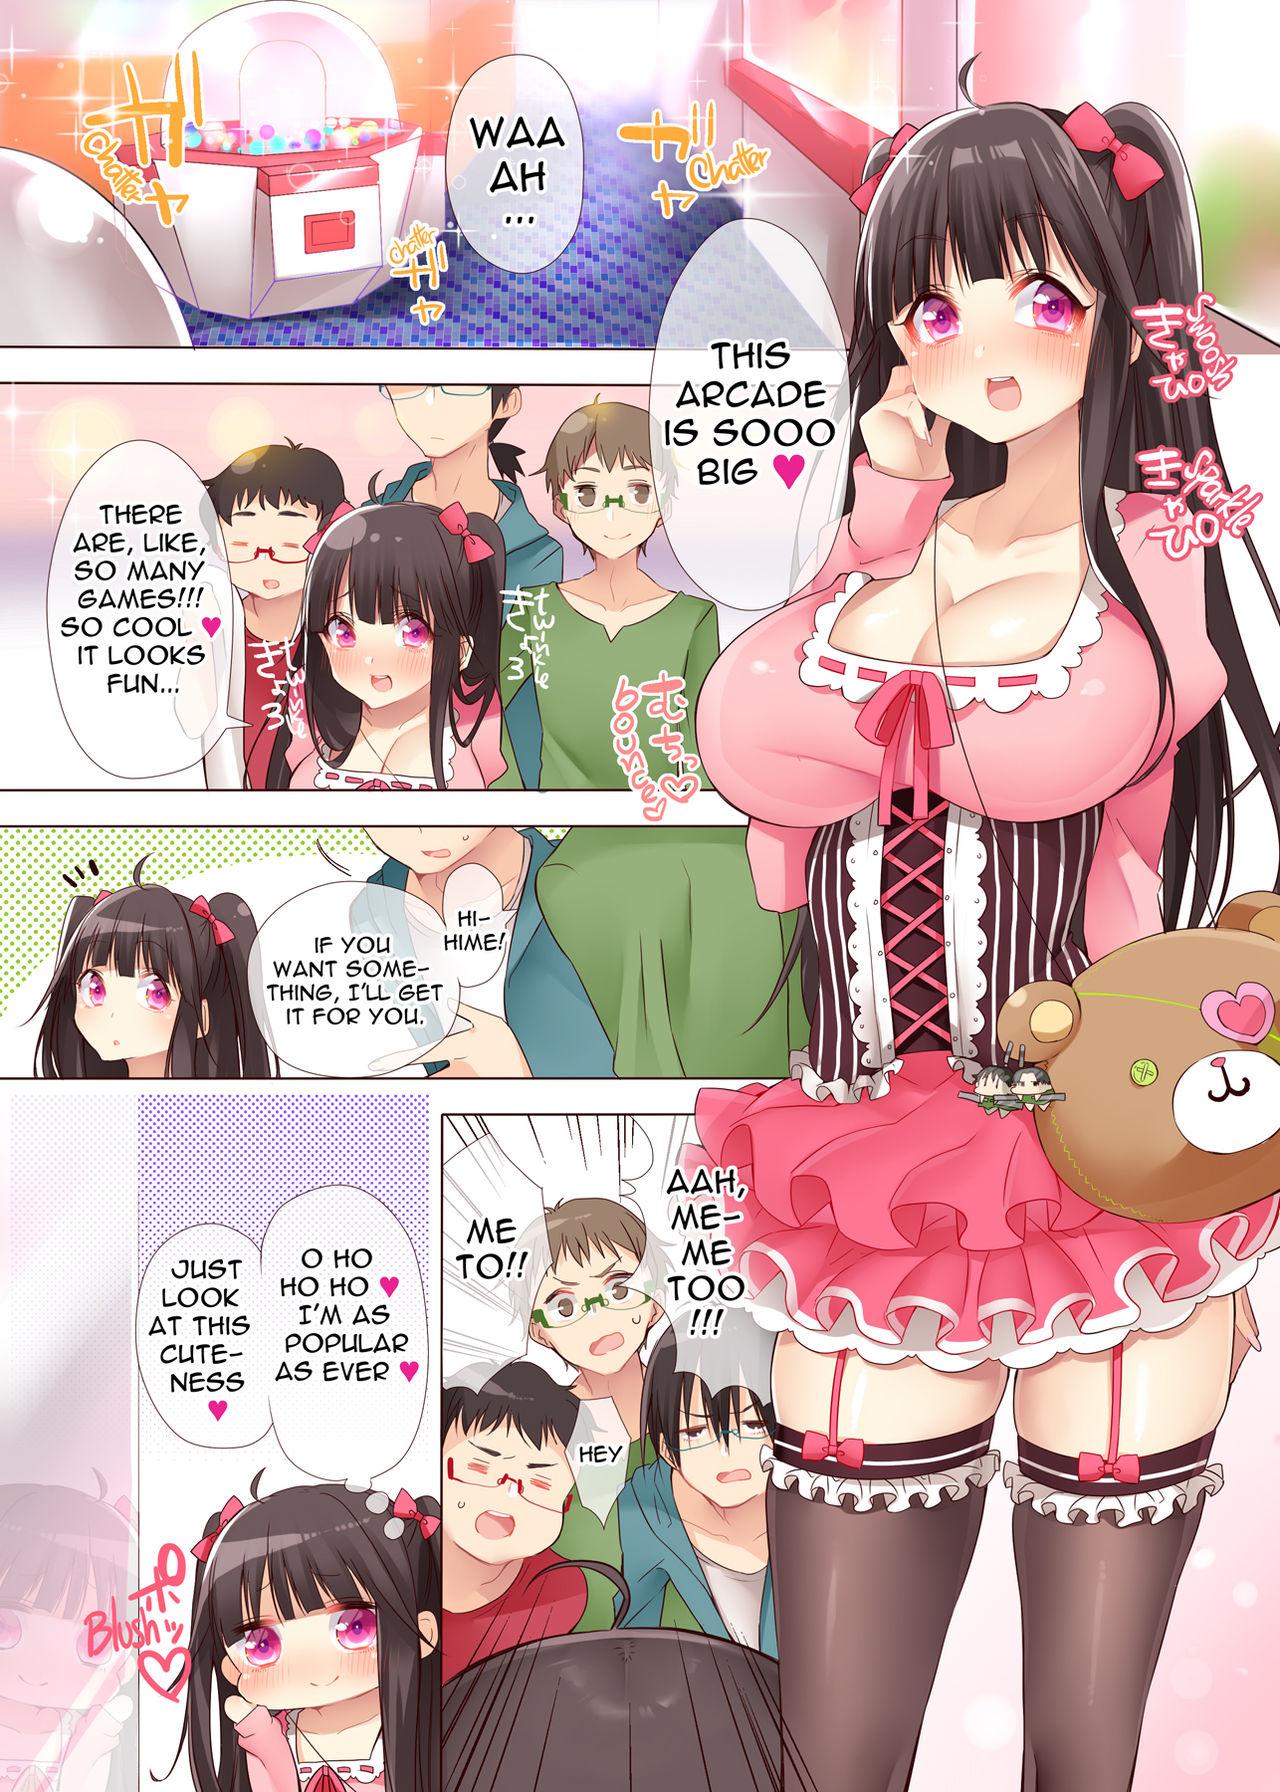 African The Princess of an Otaku Group Got Knocked Up by Some Piece of Trash So She Let an Otaku Guy Do Her Too!? Free Blowjob - Page 2